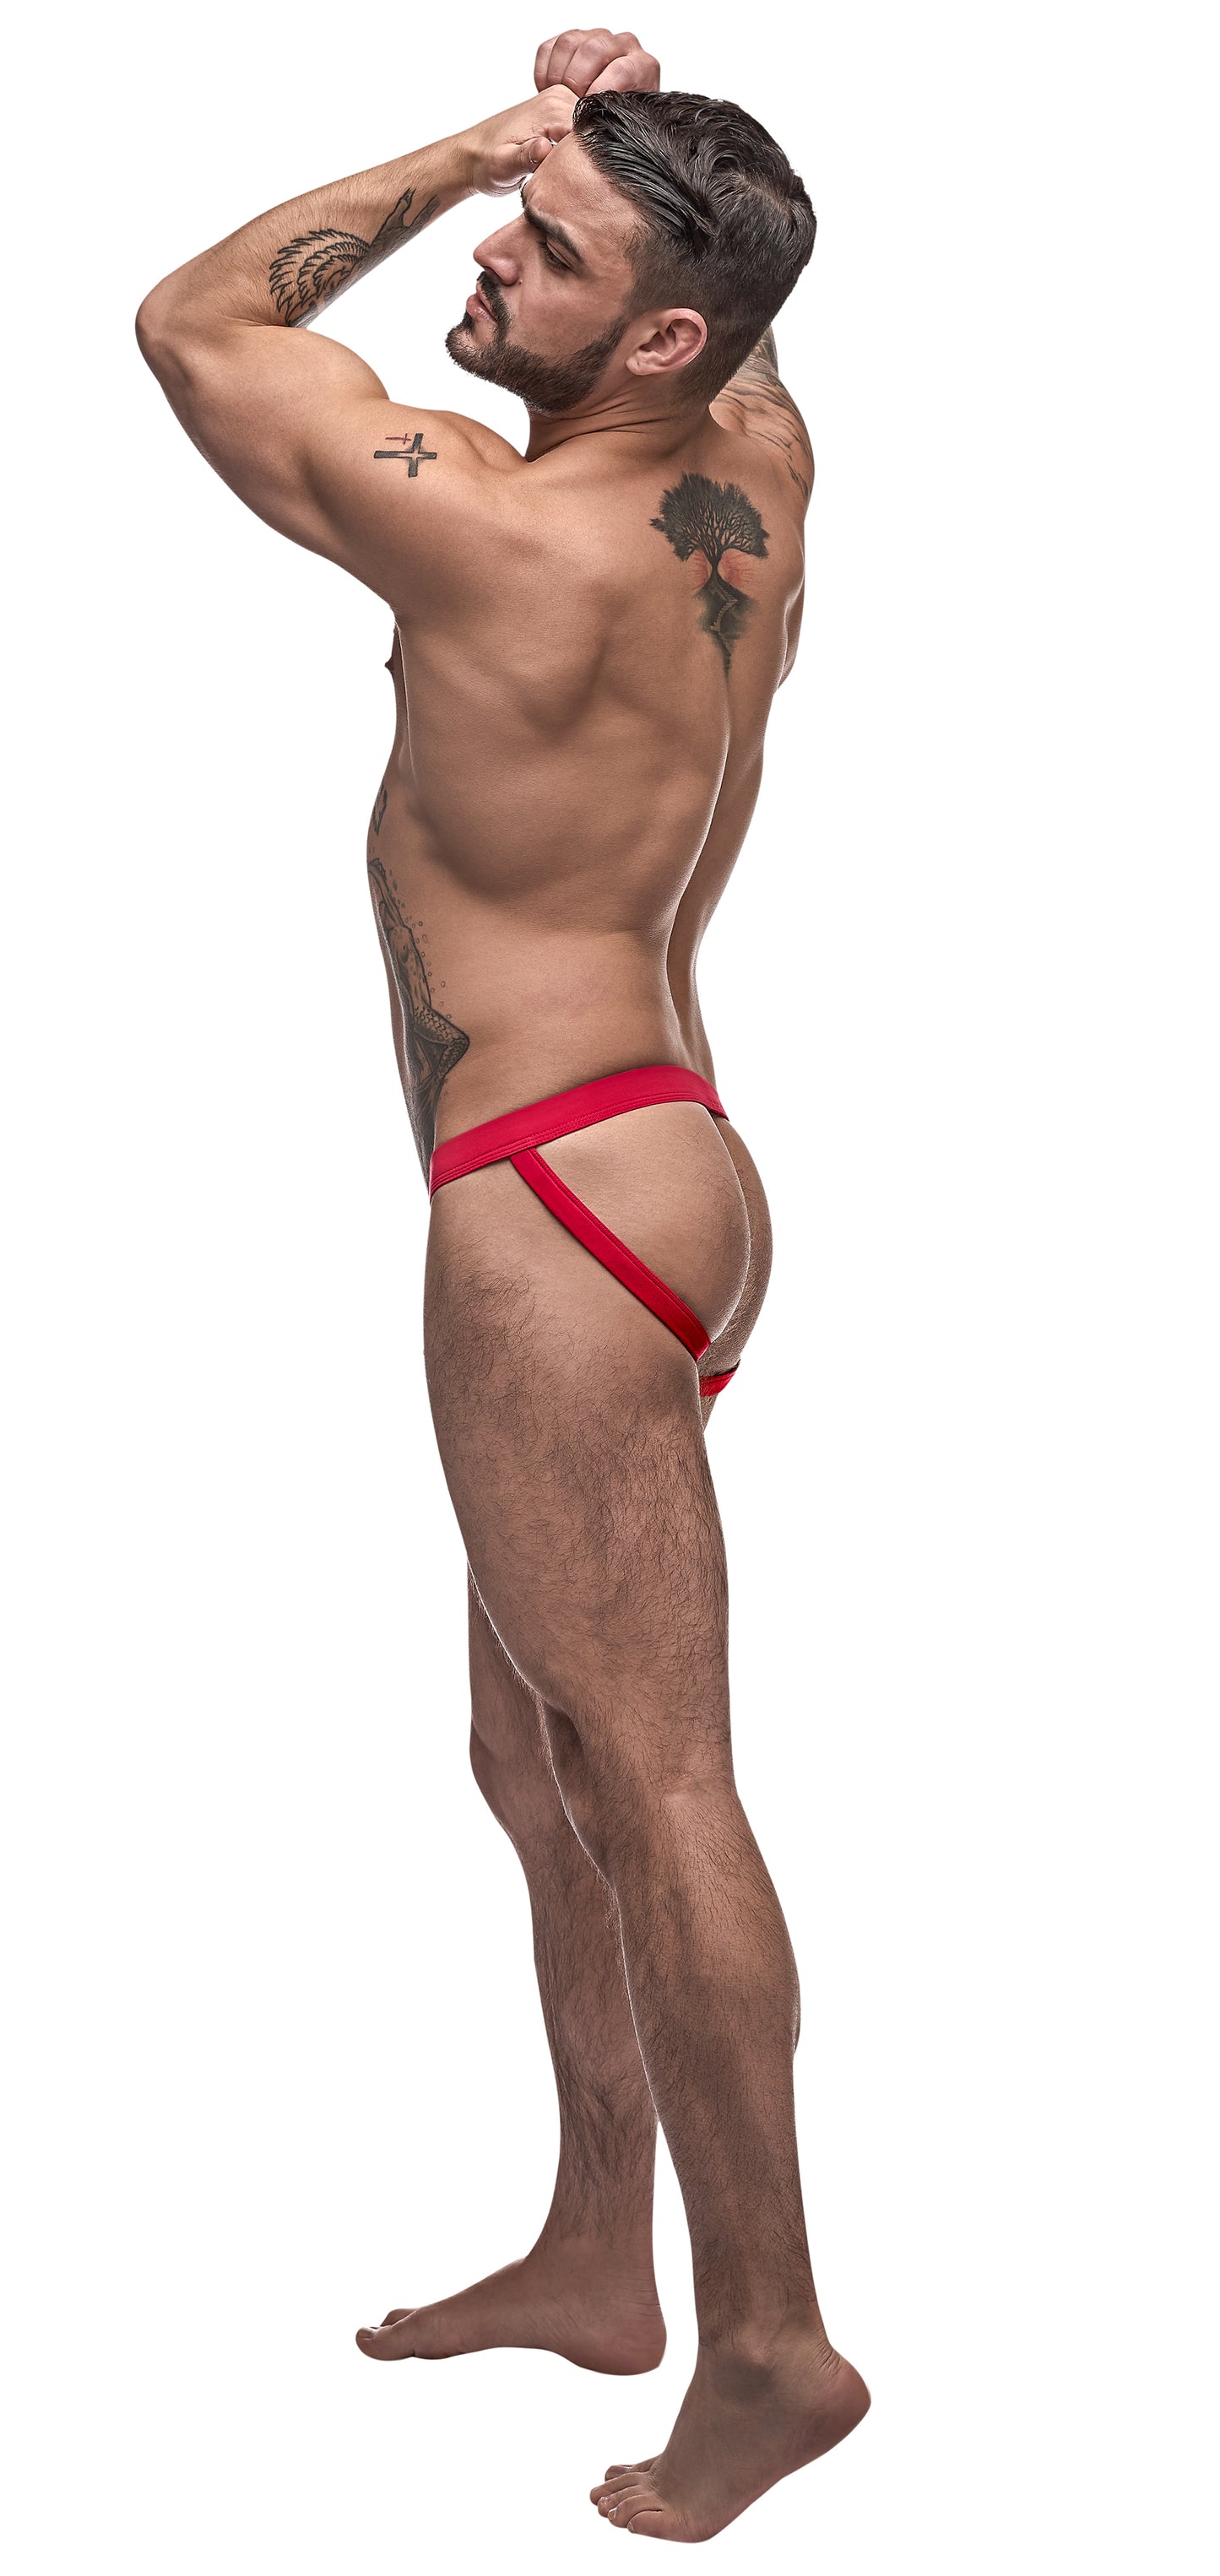 Male Power Pure Comfort Sport Jock - Just for you desires